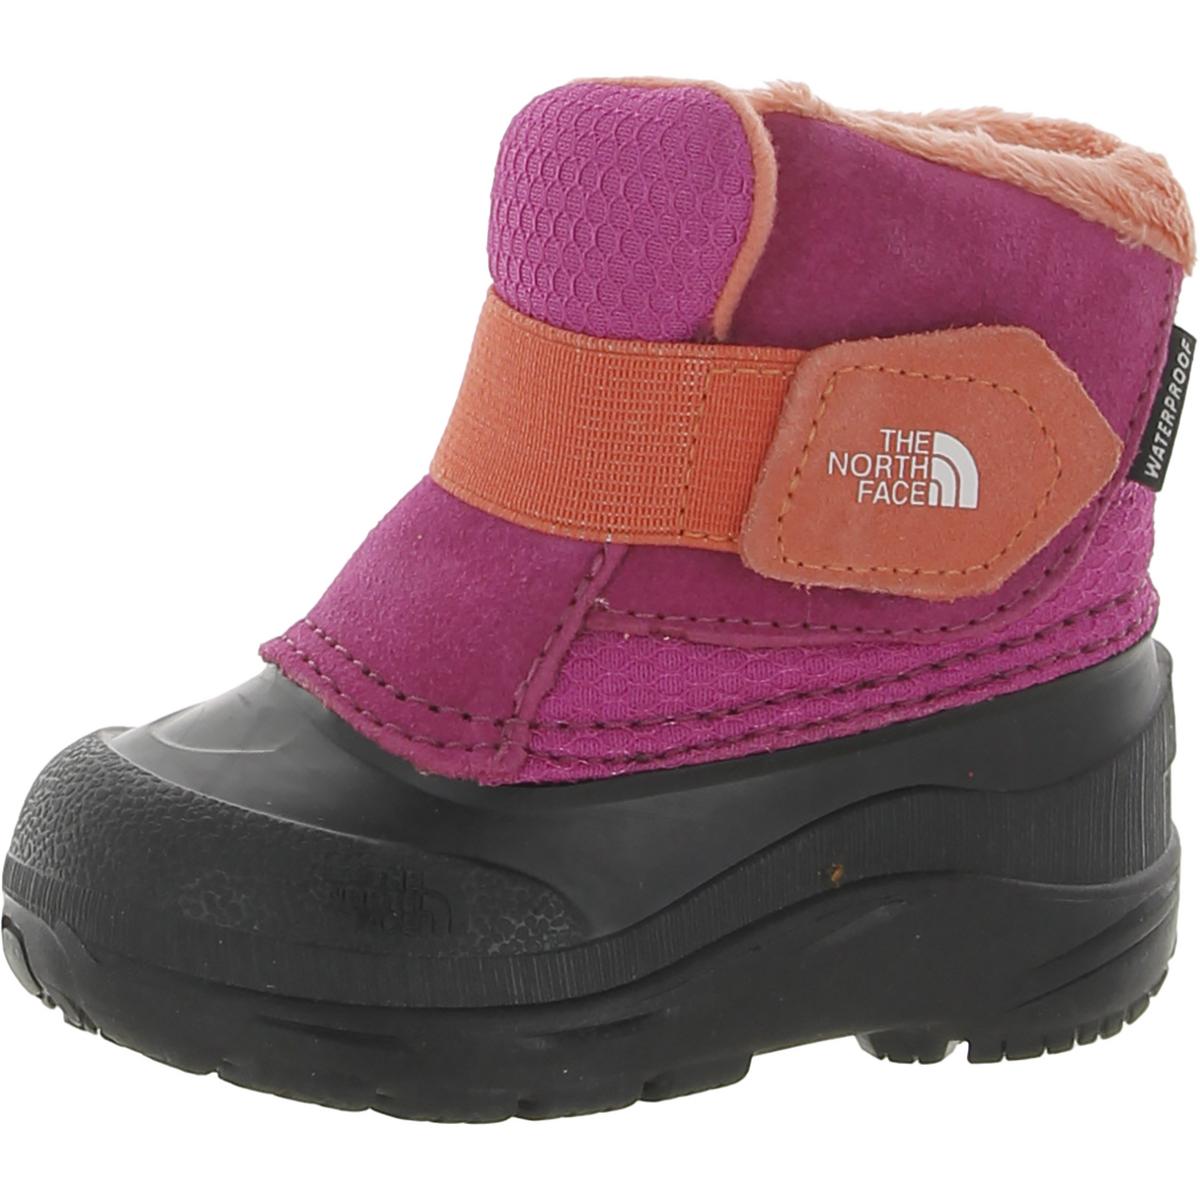 The North Face Girls Suede Cold Weather Winter & Snow Boots